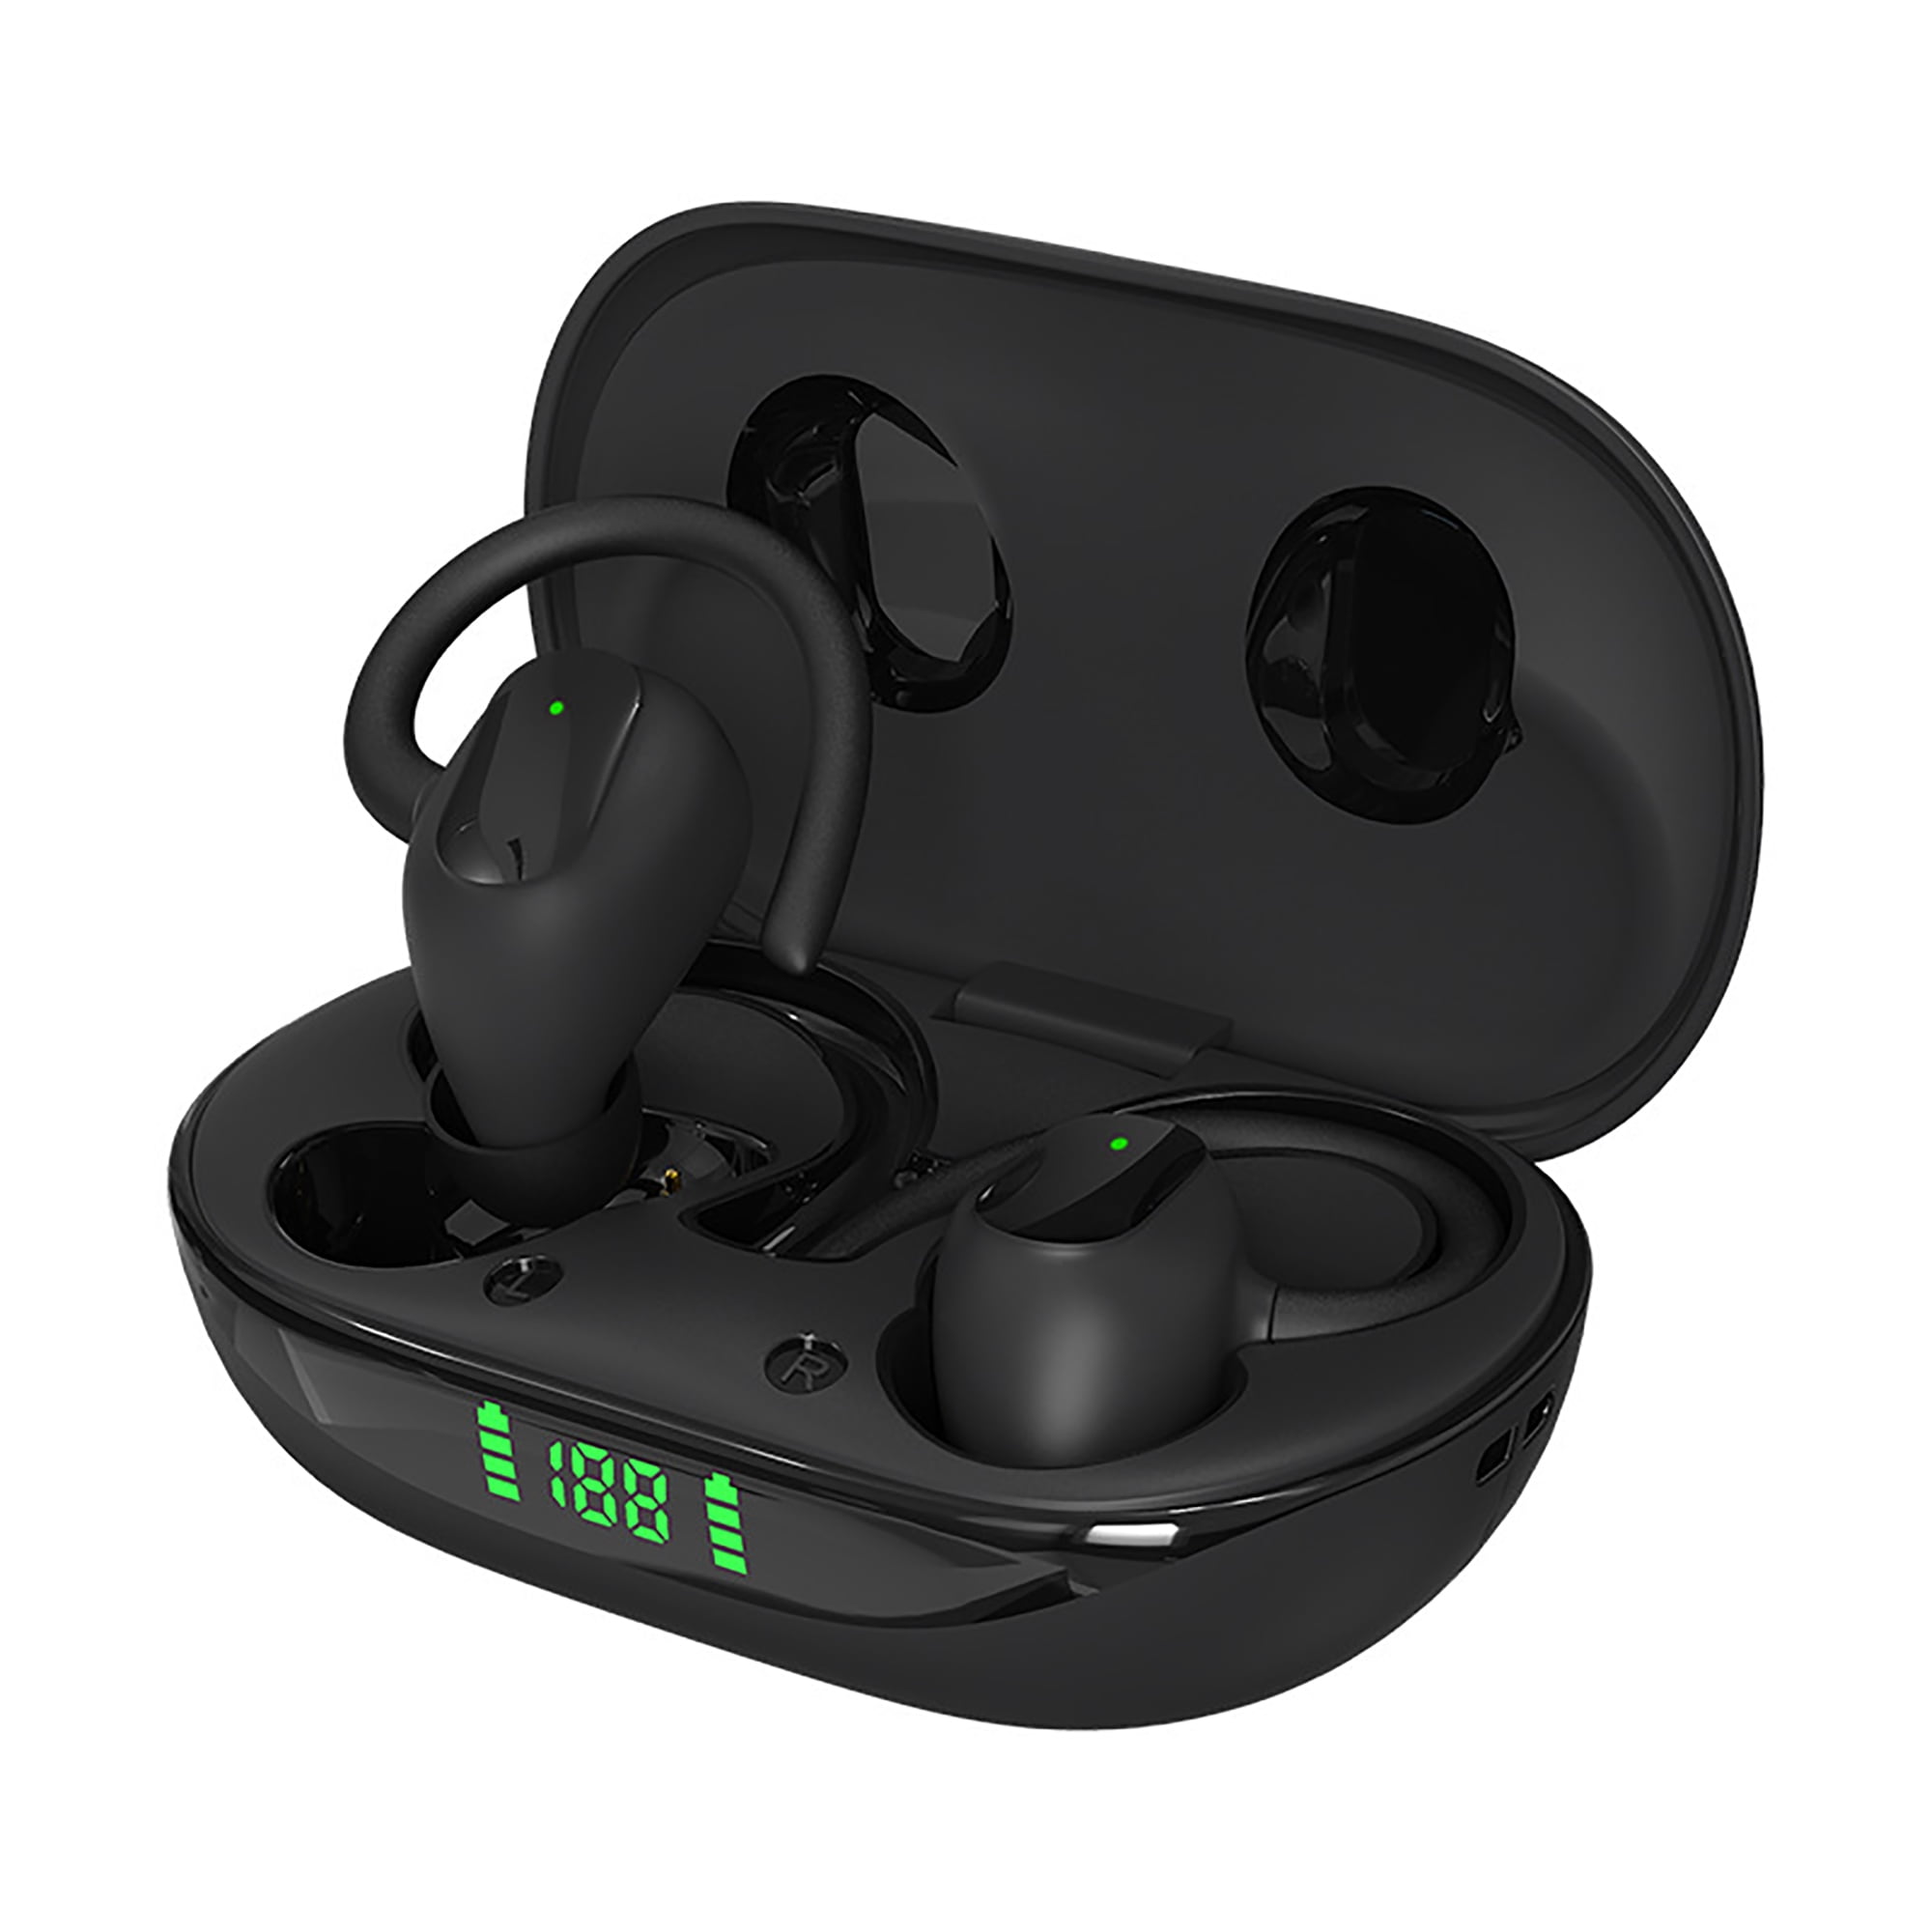 Bluetooth 5.0 Headphones Wireless Earbuds Noise Cancelling IPX7